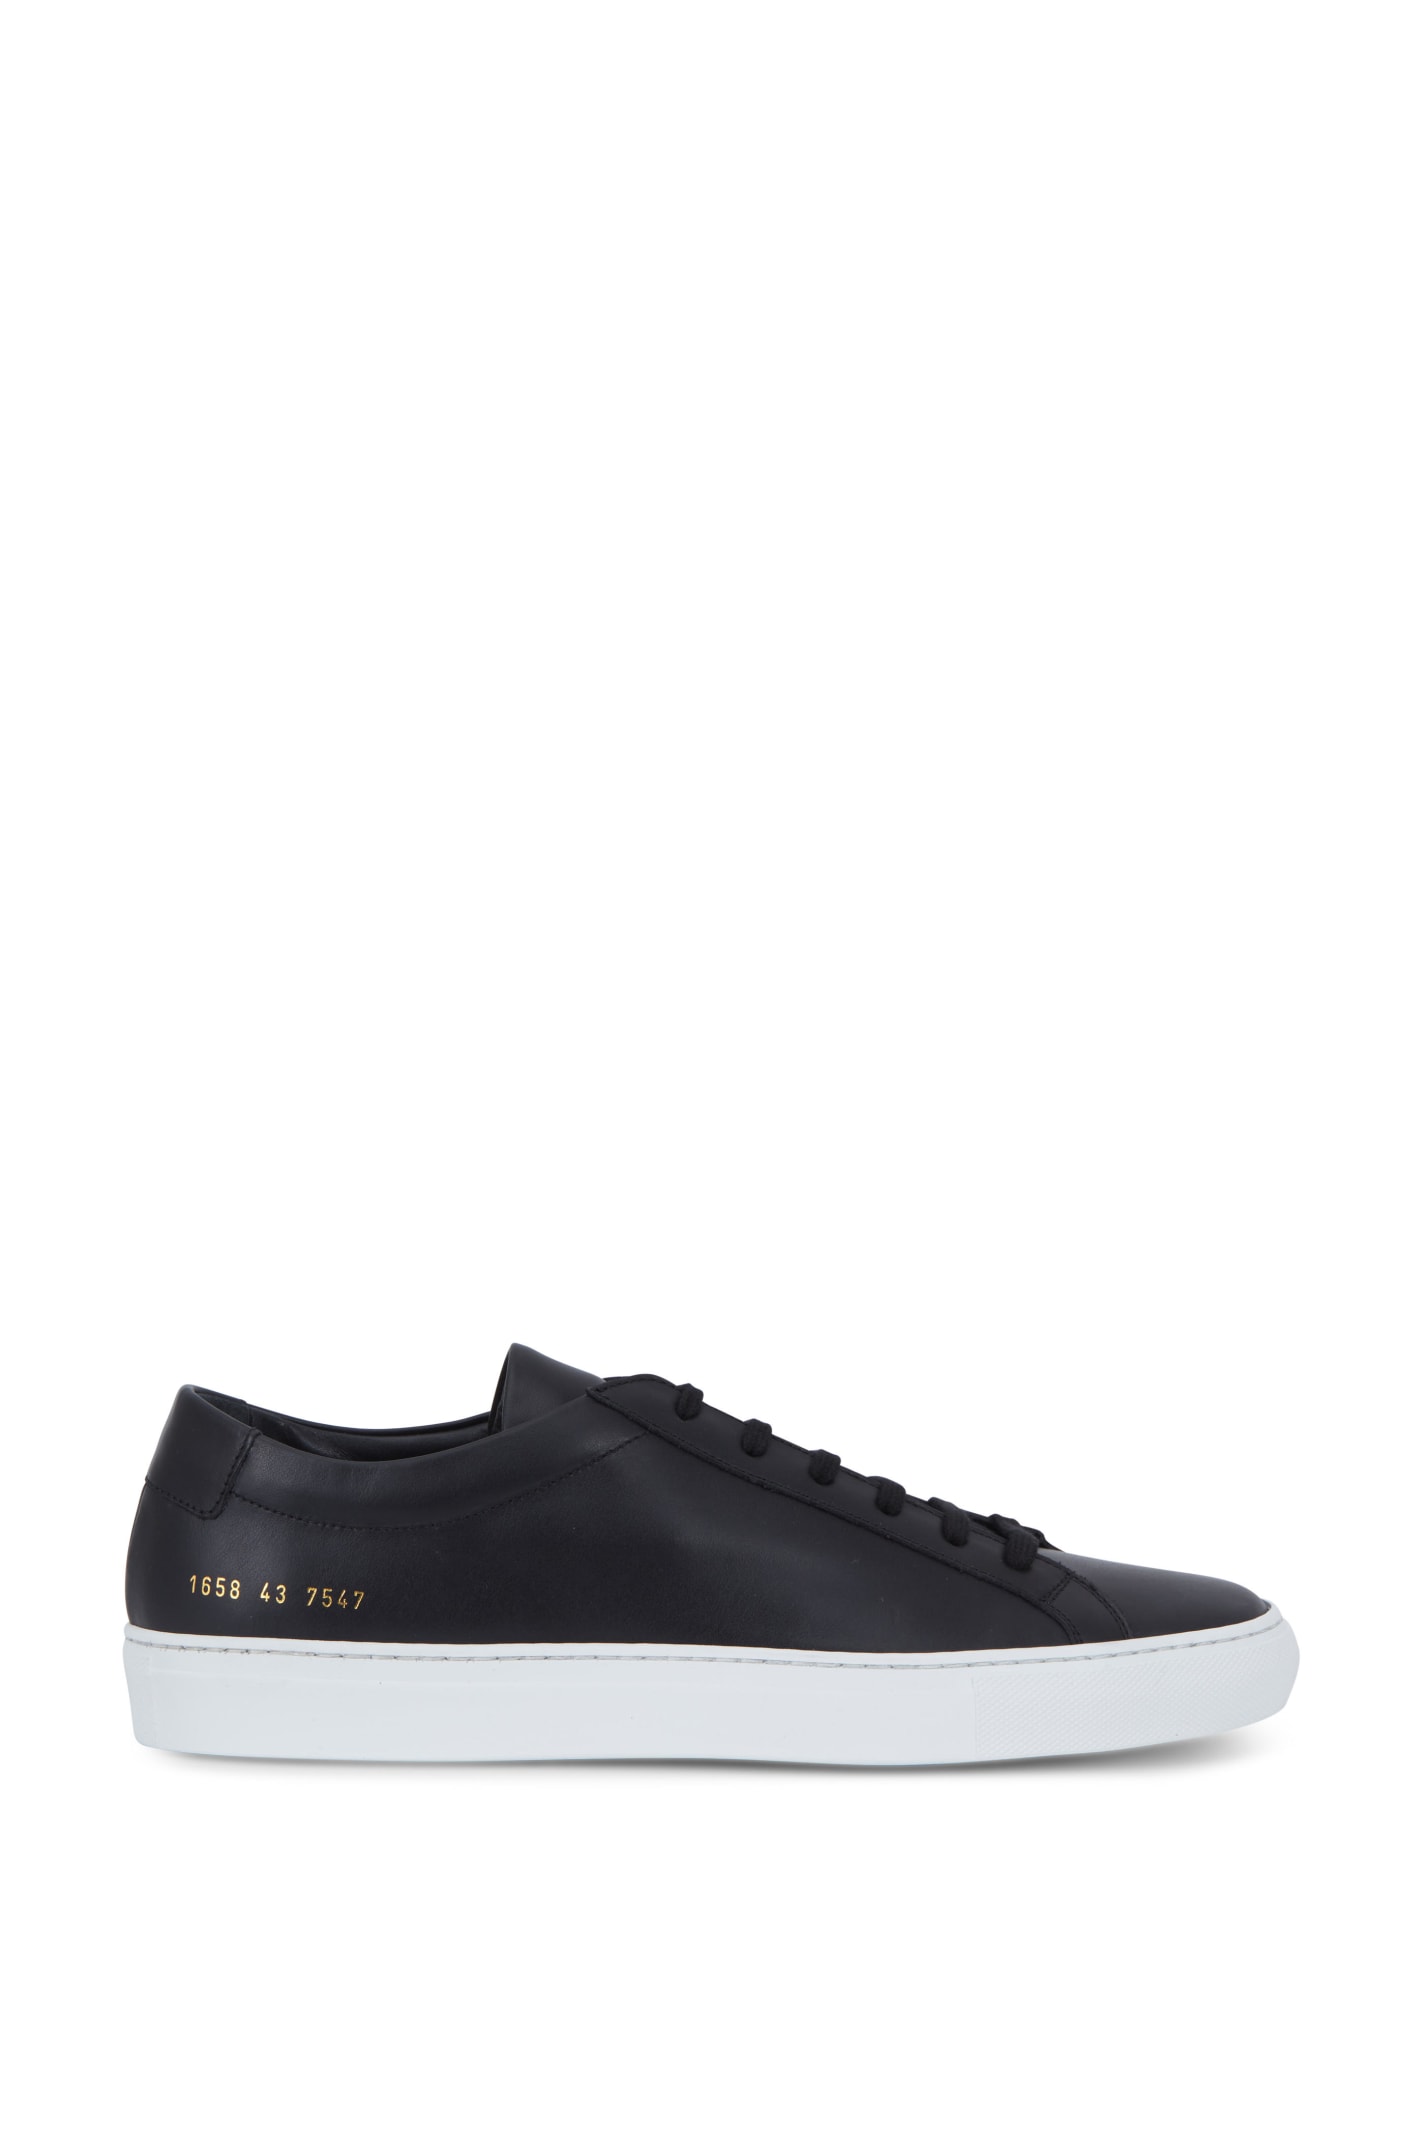 Common Projects Common Projects Achilles Low White Sole - Black ...